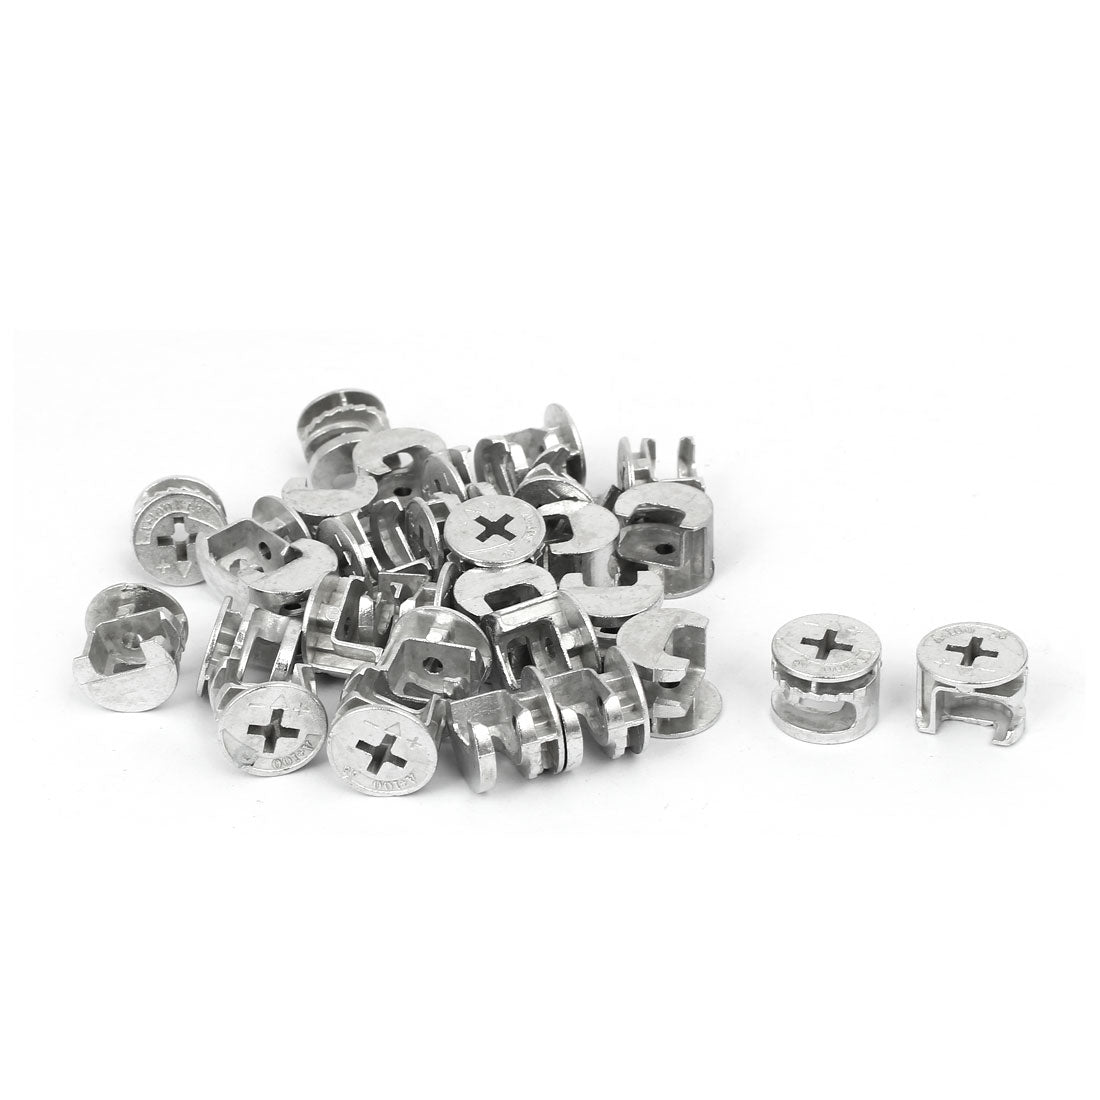 uxcell Uxcell Furniture Hardware Connecting Fitting Eccentric Cam Wheel 15mm Diameter 30pcs